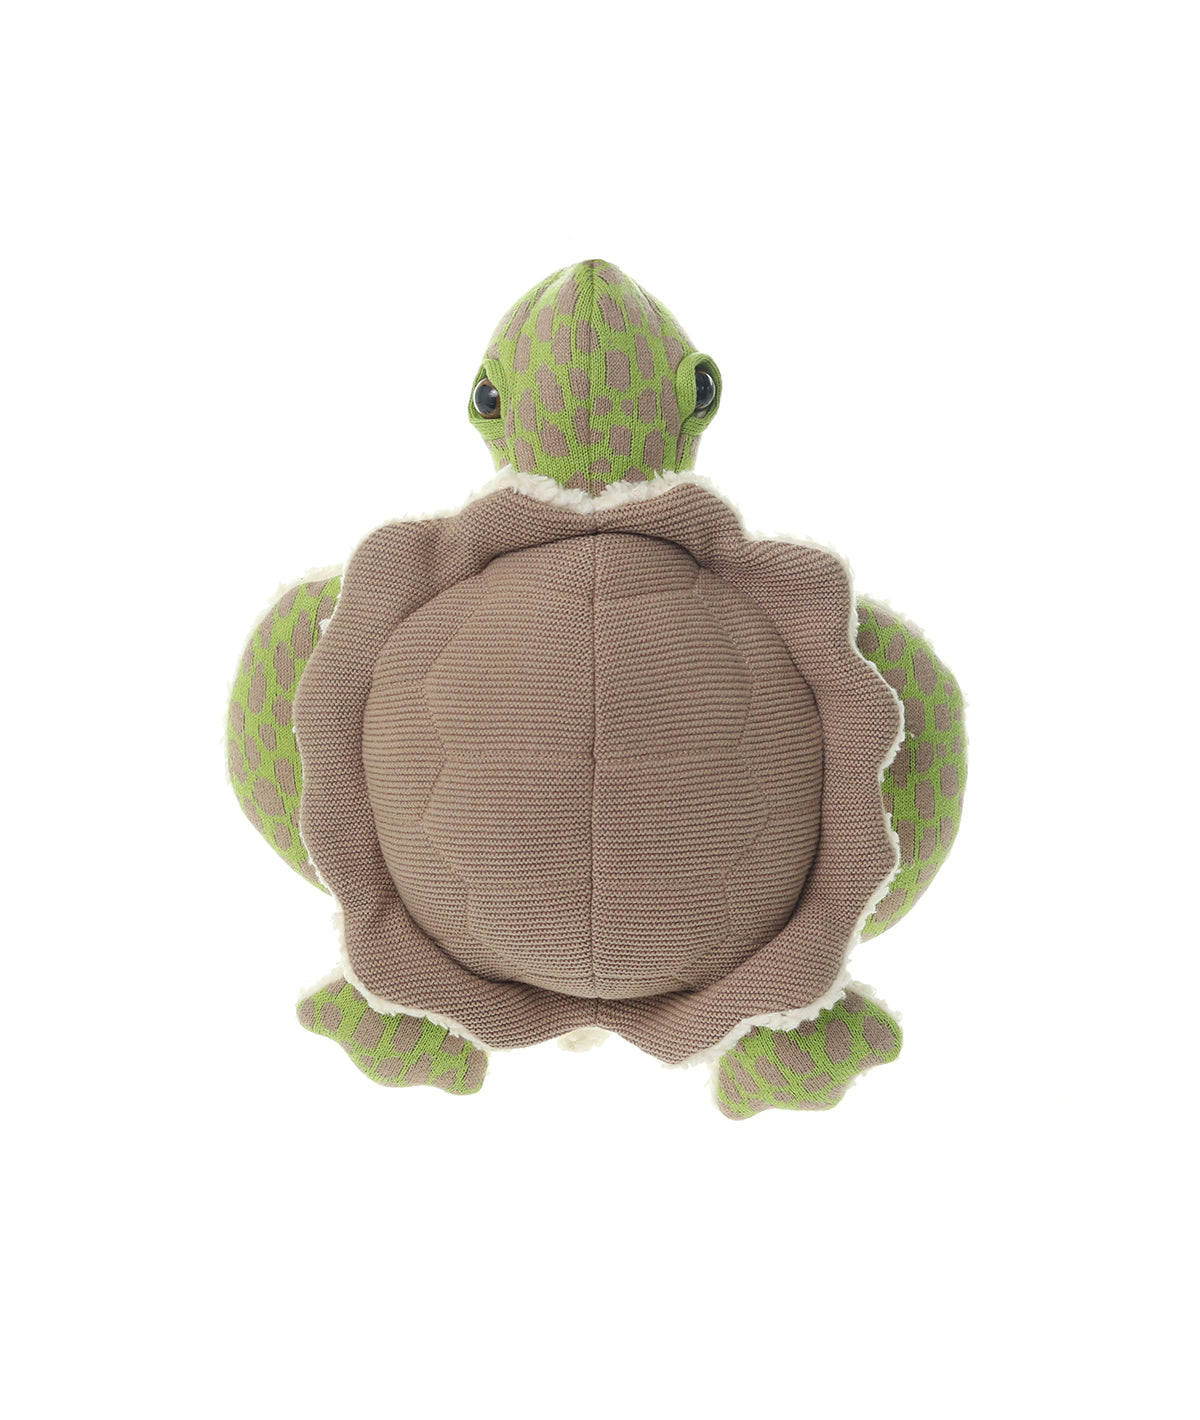 Shelly Tortoise Cotton Knitted Stuffed Soft Toy (Dove Beige & Medium Green)